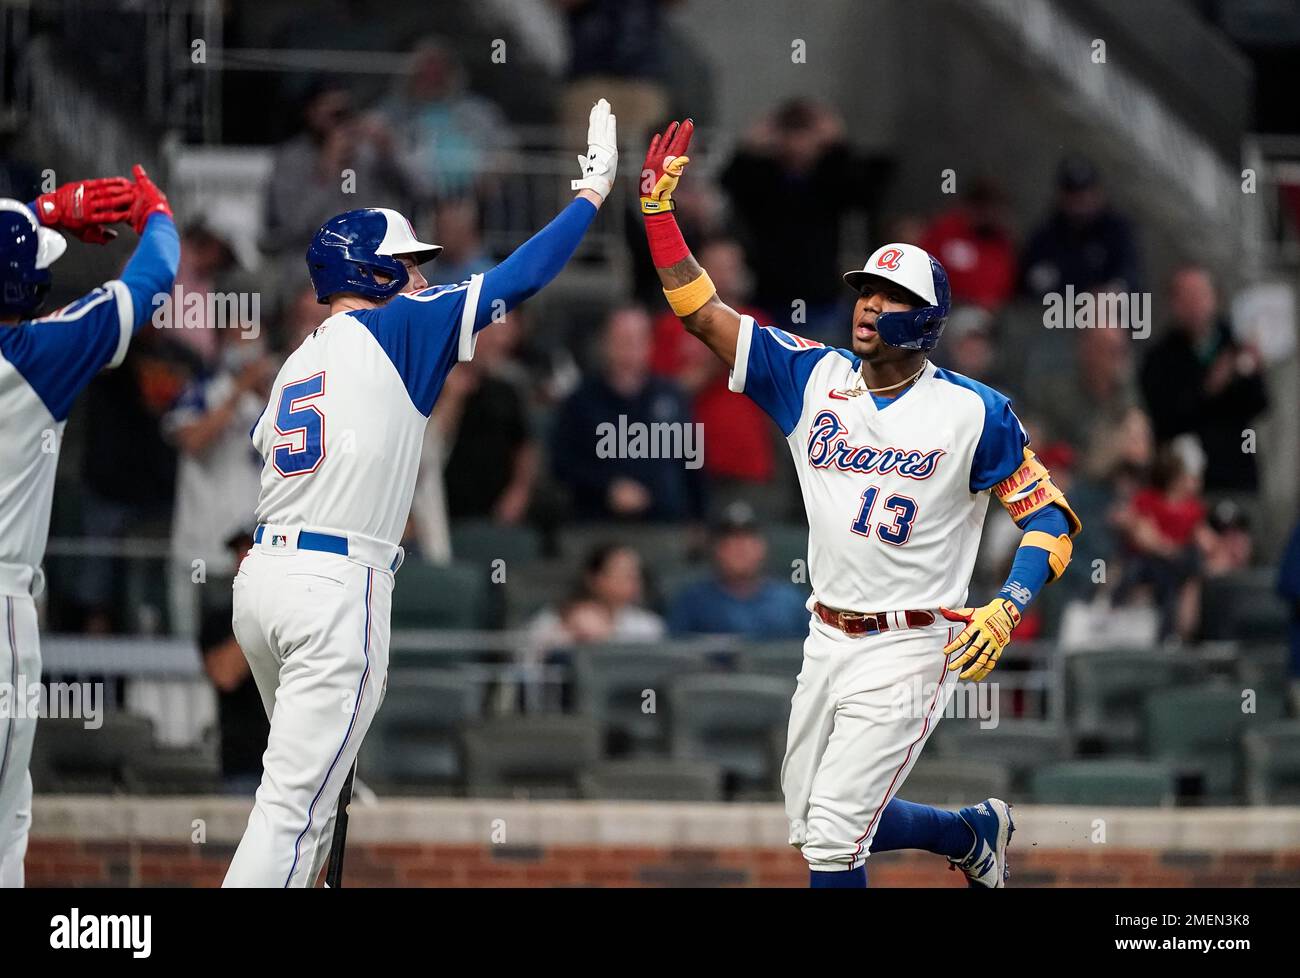 Atlanta Braves' Ronald Acuna Jr., right, high-five Freddie Freeman after  hitting a home run during the third inning of the team's baseball game  against the Miami Marlins on Wednesday, April 14, 2021